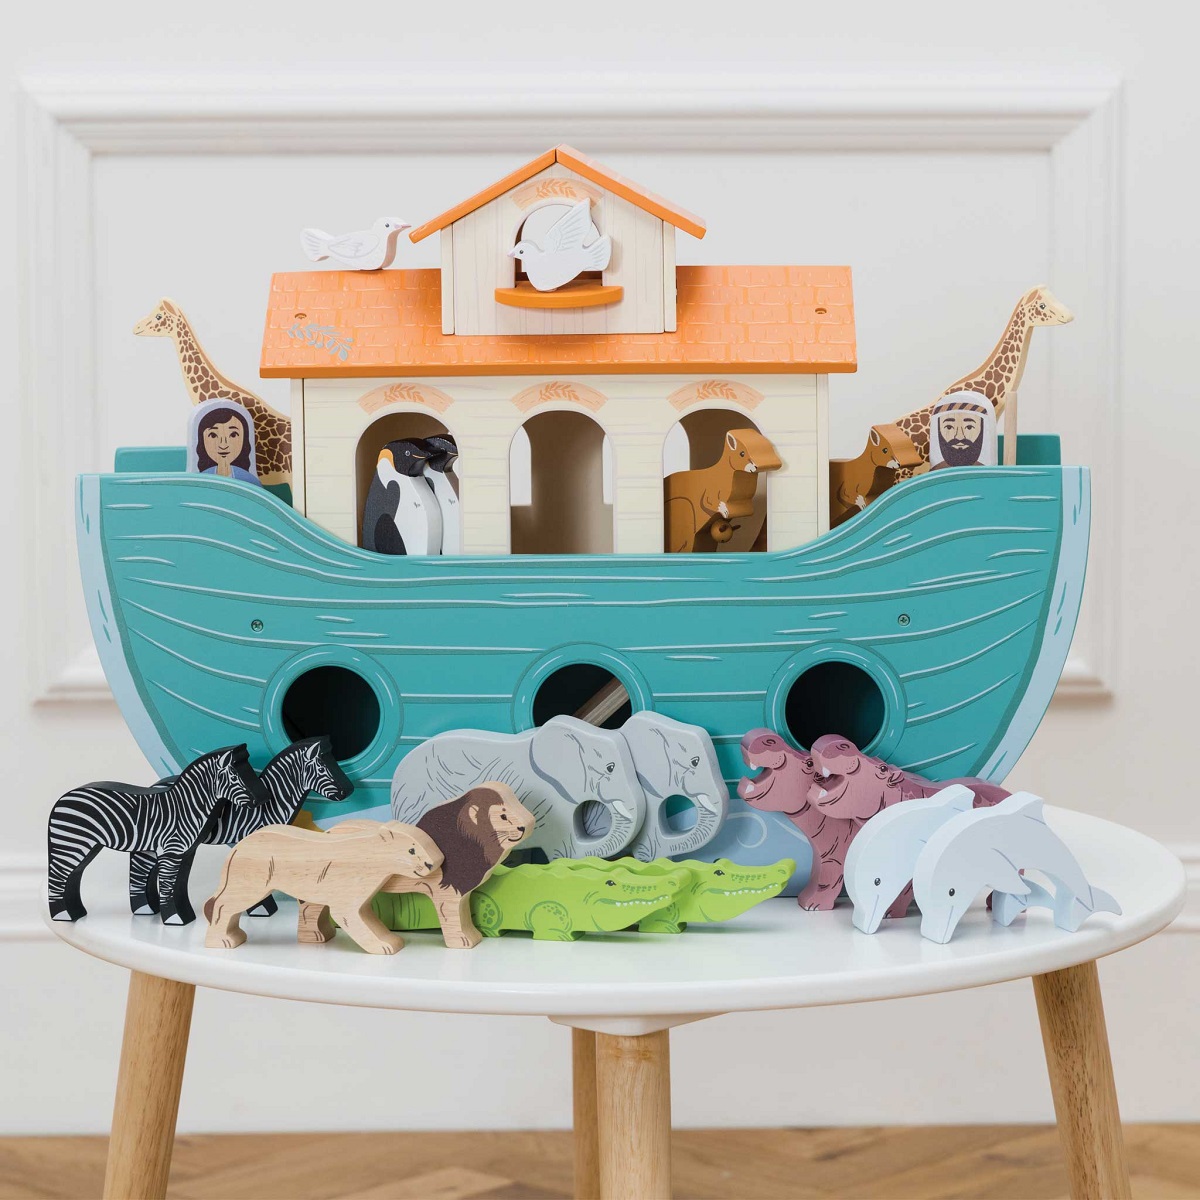 Baby and Toddler - Noah's Great Wooden Ark & Animals